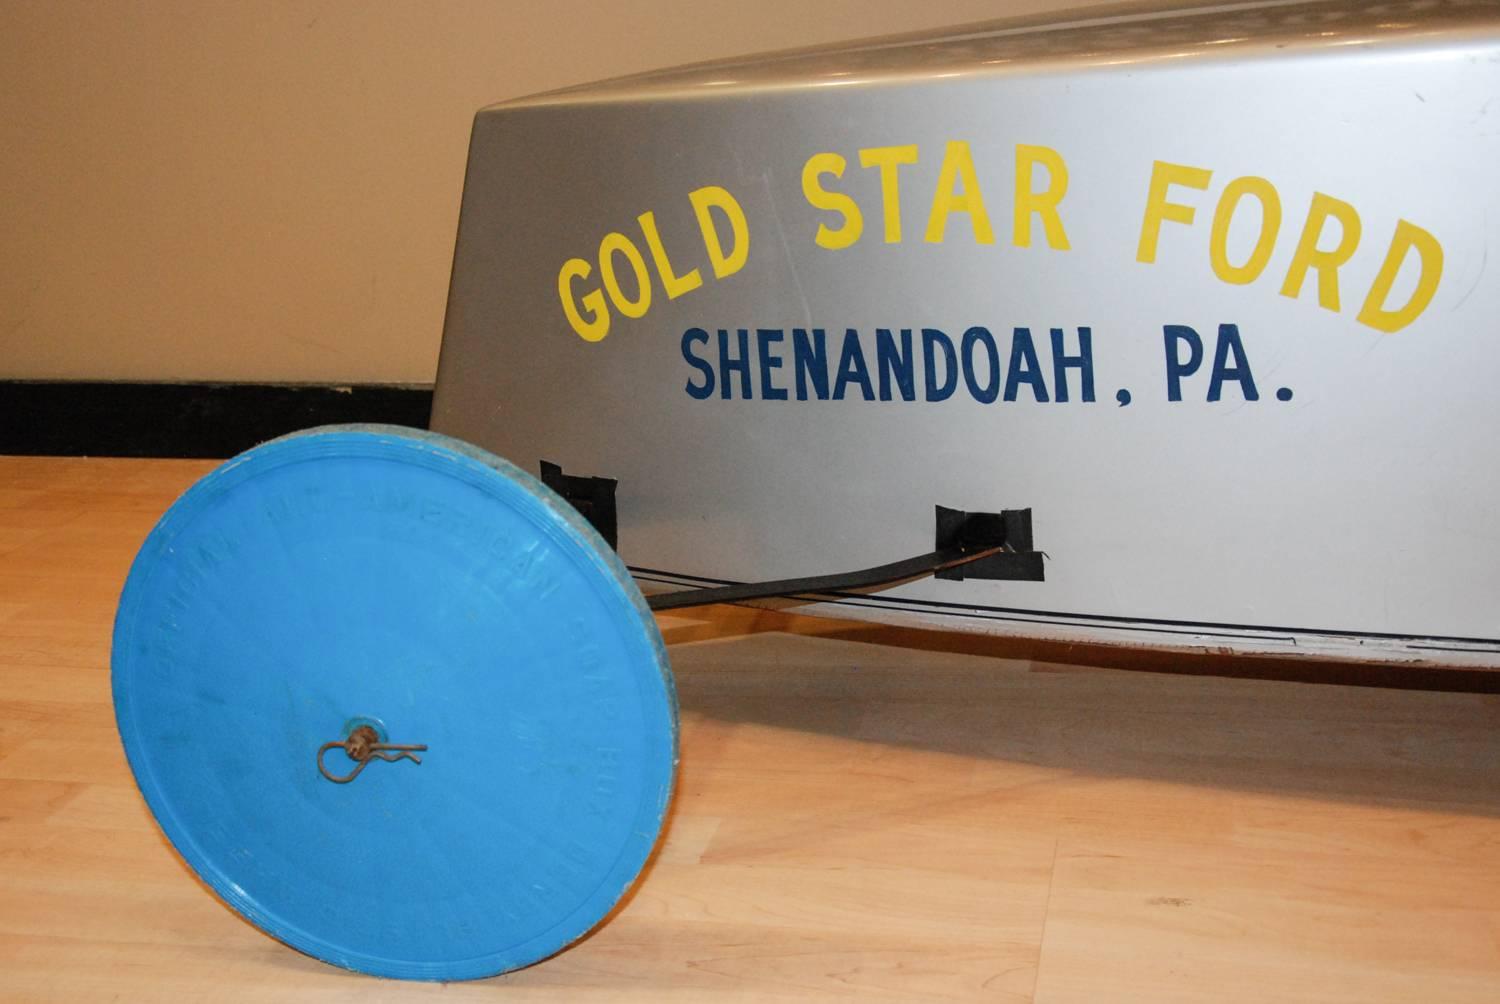 A sleek metallic silver soap box derby car from Shenandoah, Pennsylvania driven by Buzzy Burns.  The car has official All-American Soap Box Derby plastic wheels and Buzzy Burns' red racing helmet with chin strap.  What a great gift for the kid who